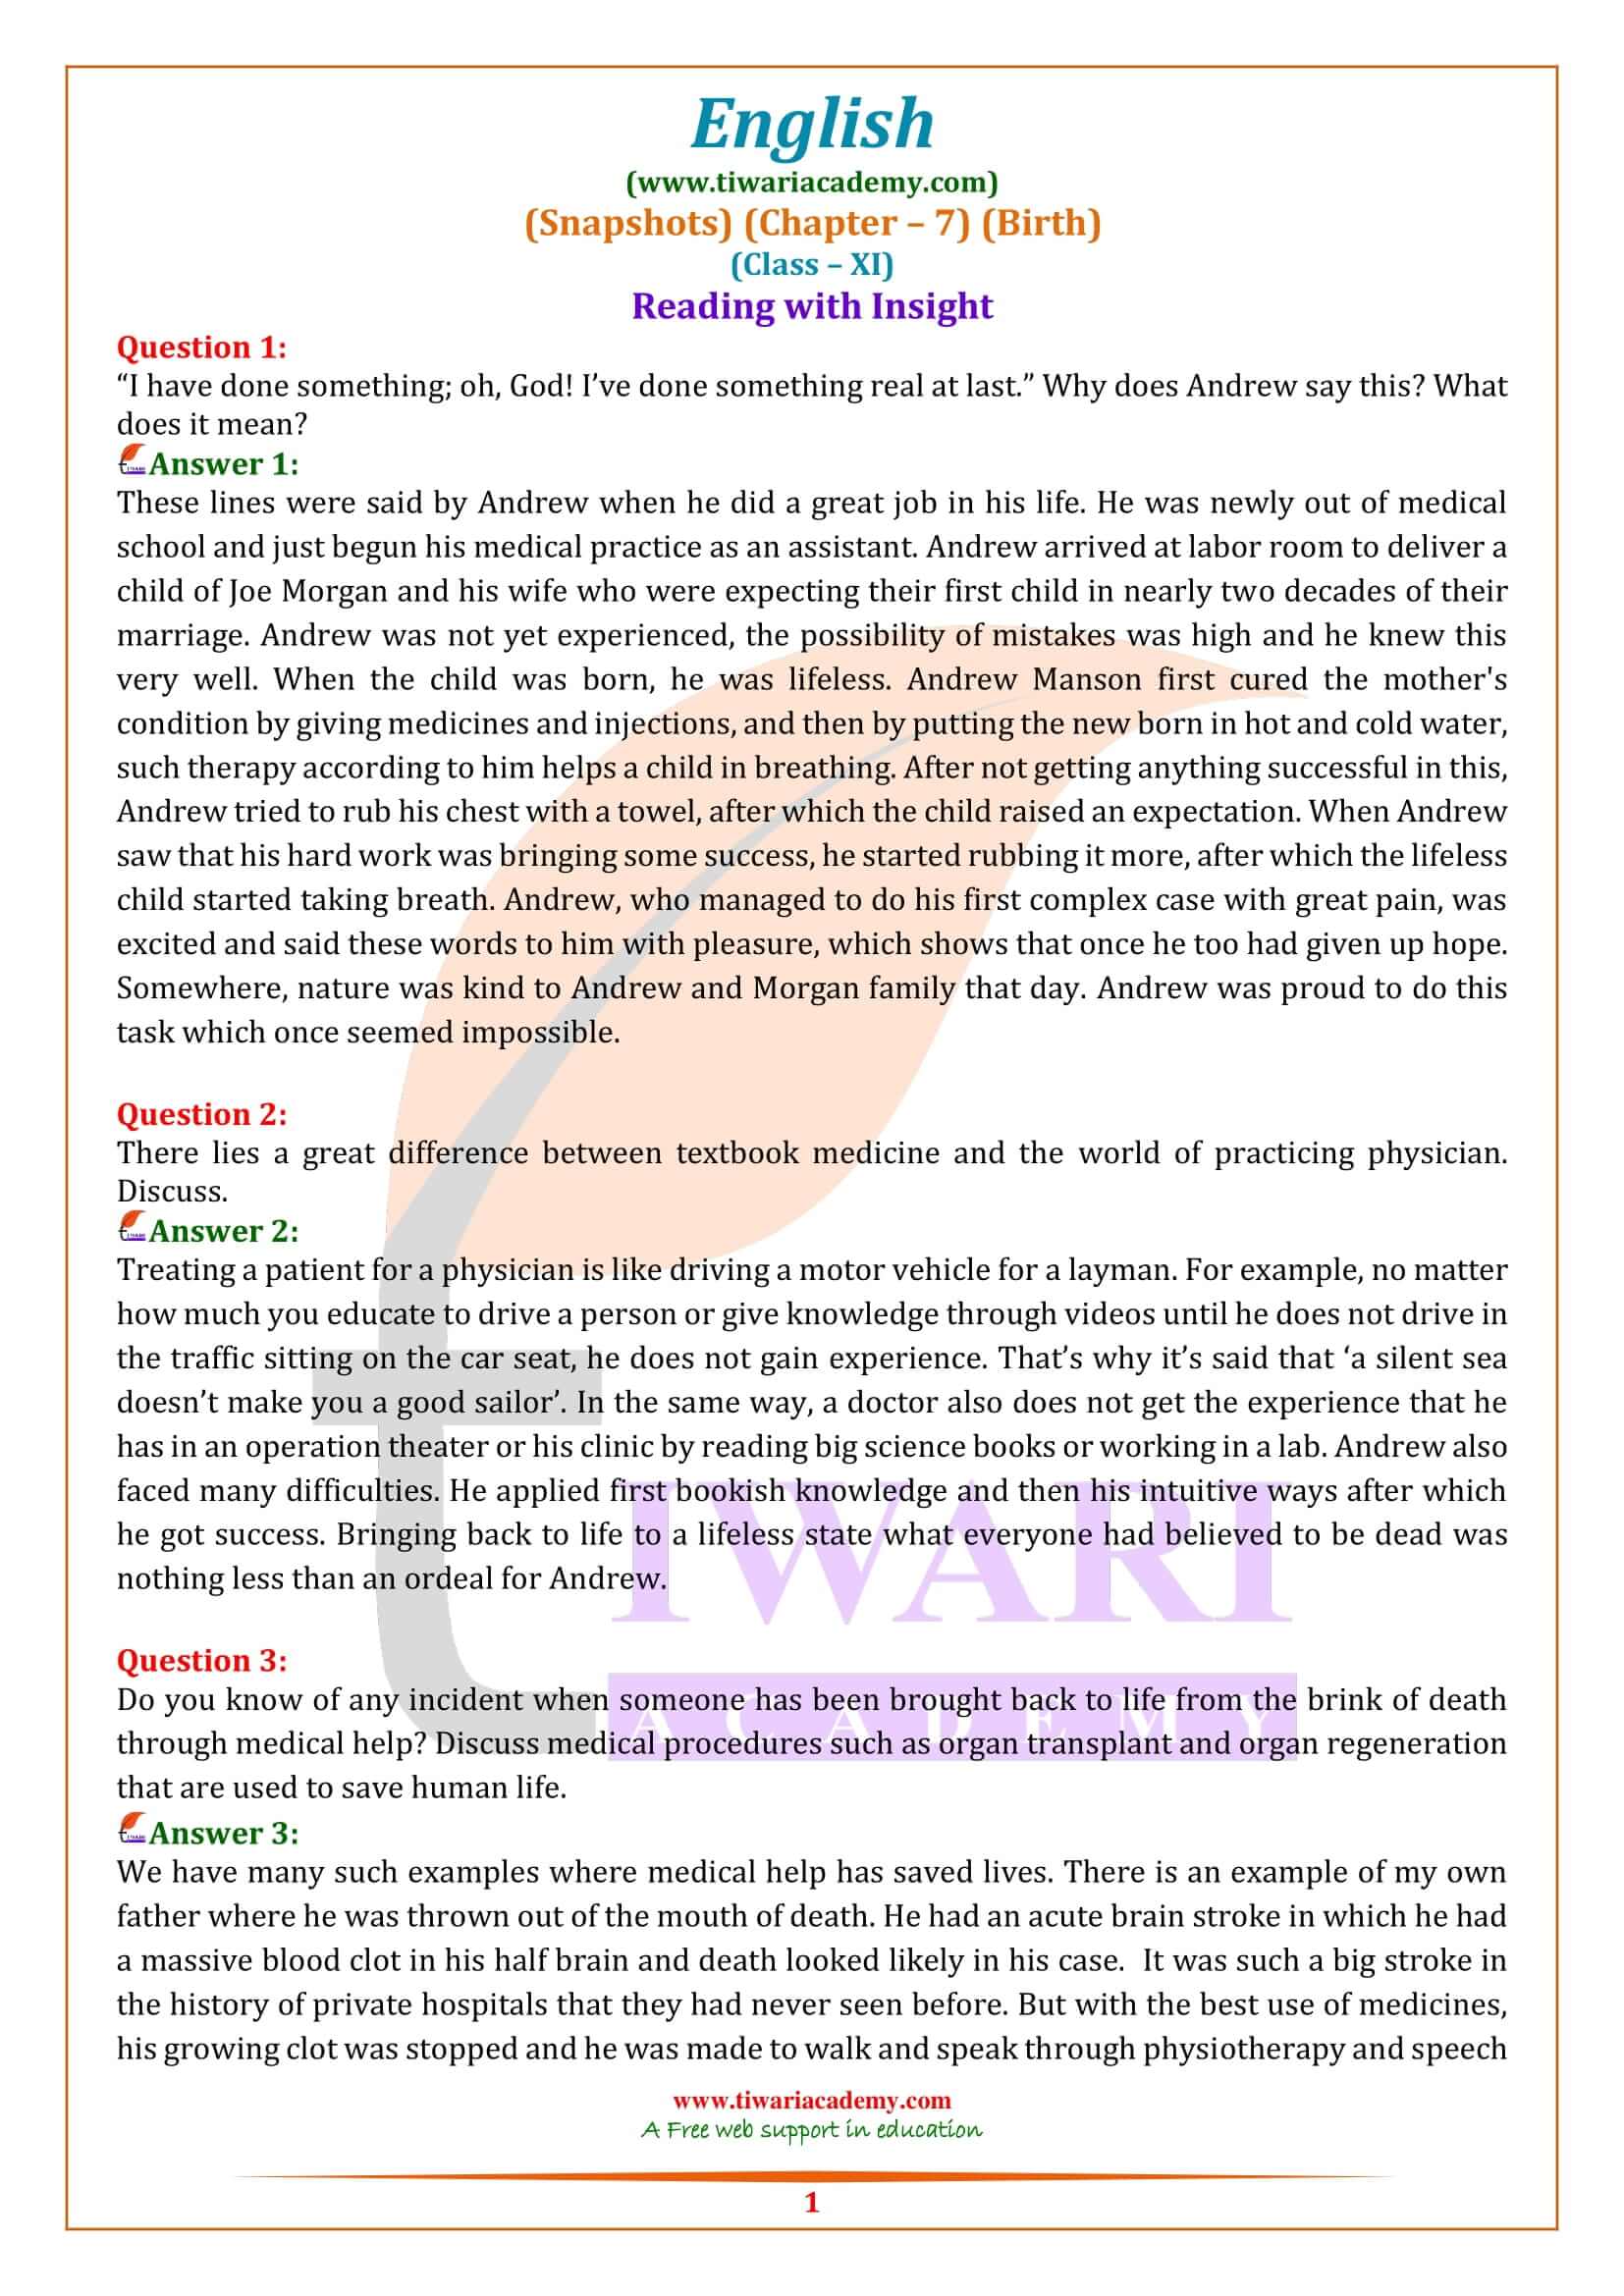 NCERT Solutions for Class 11 English Snapshots Chapter 7 Question Answers